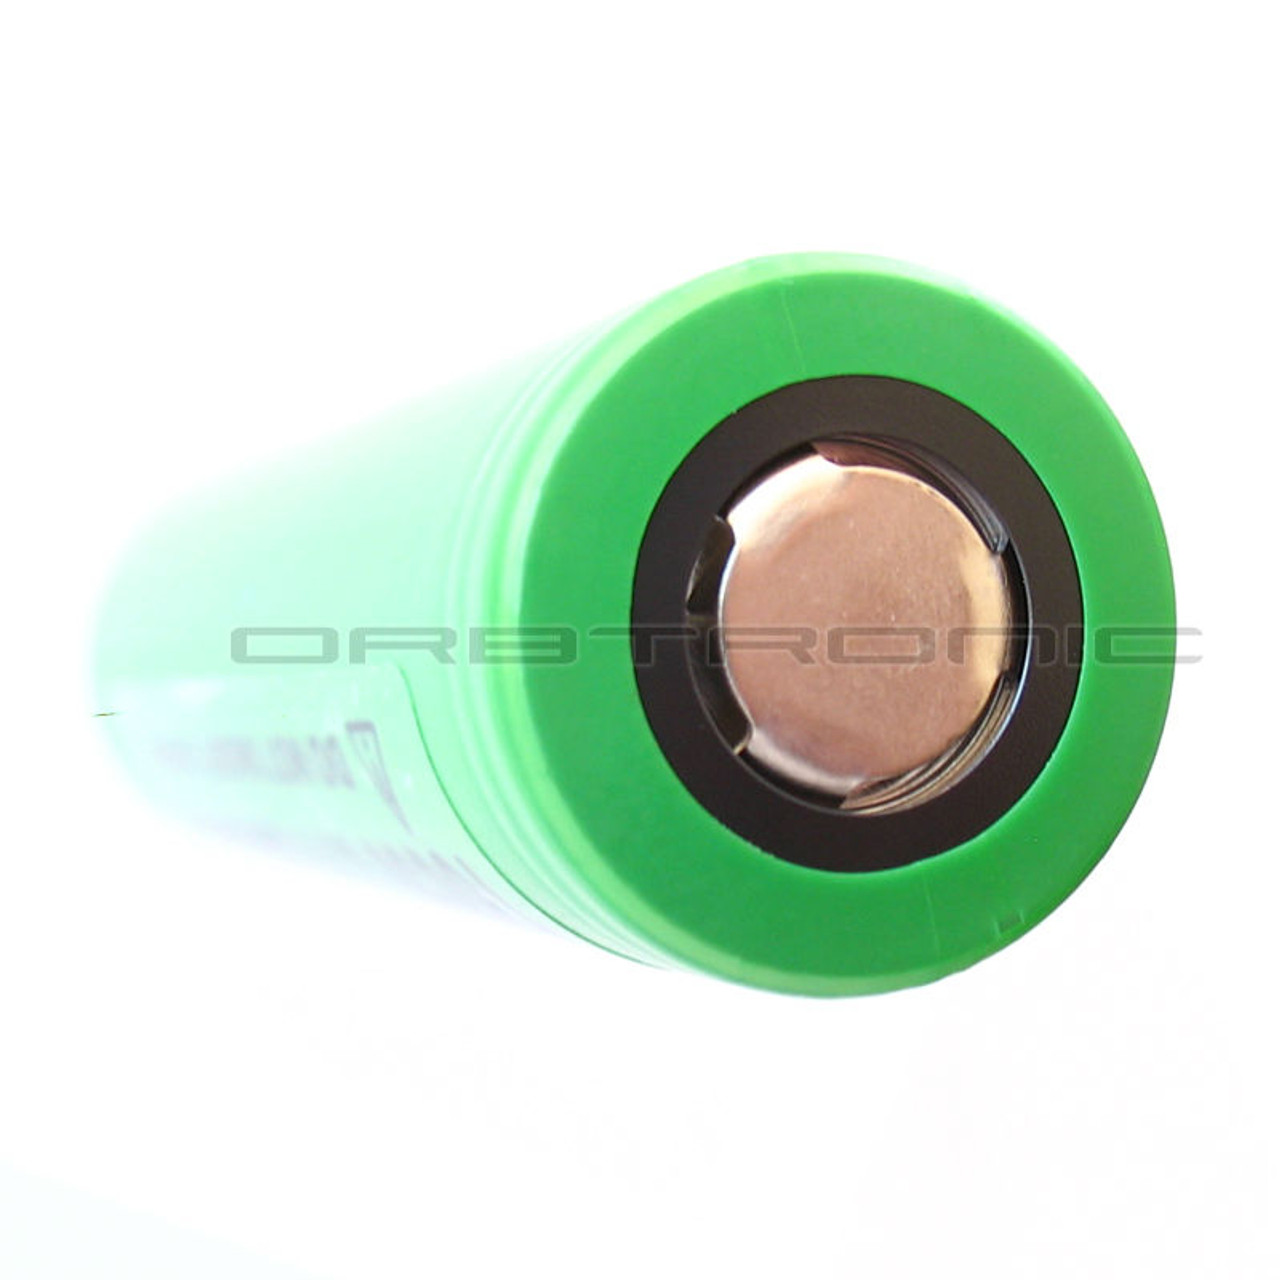 Sony - Murata VTC5A 18650 Battery US18650VTC5A Flat Top High Drain Green  IMR-Li-ion 3.7V Battery Safety Case Included